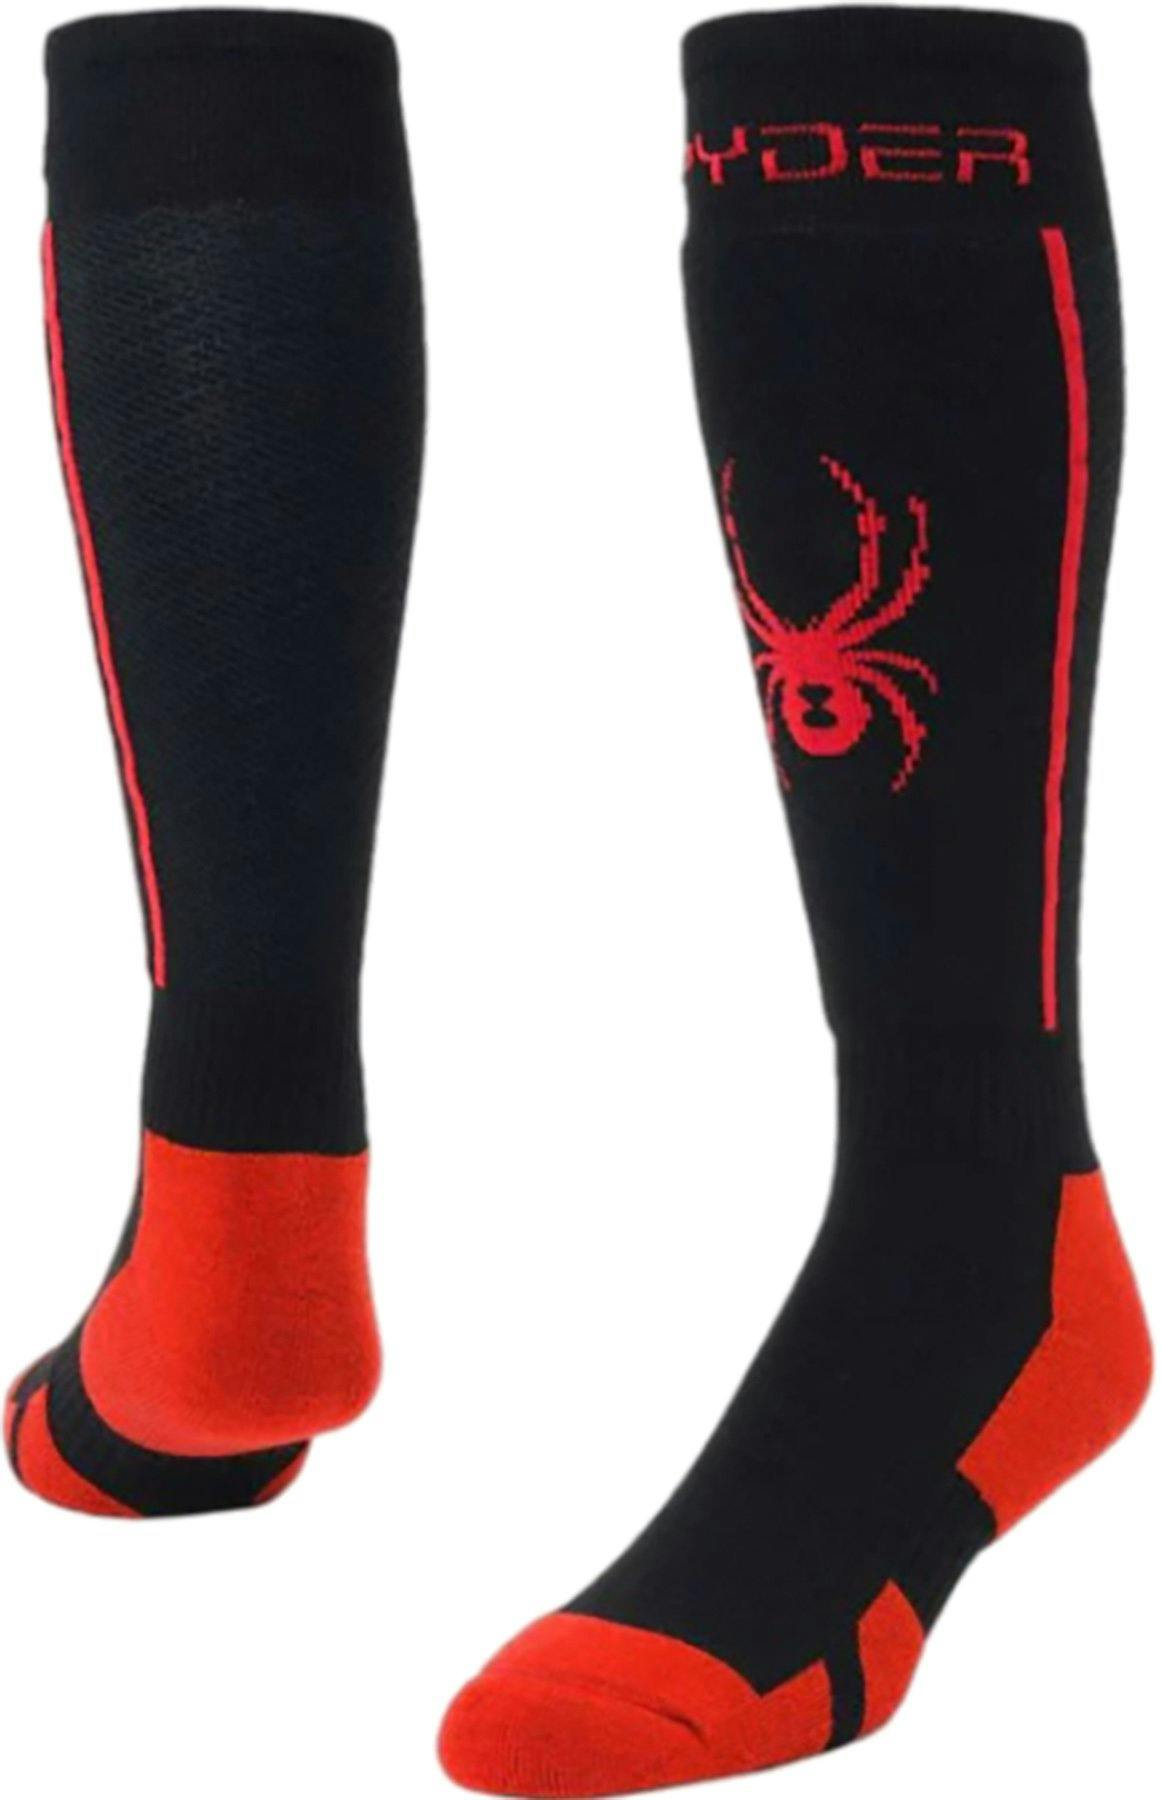 Product image for Sweep Socks - Men's